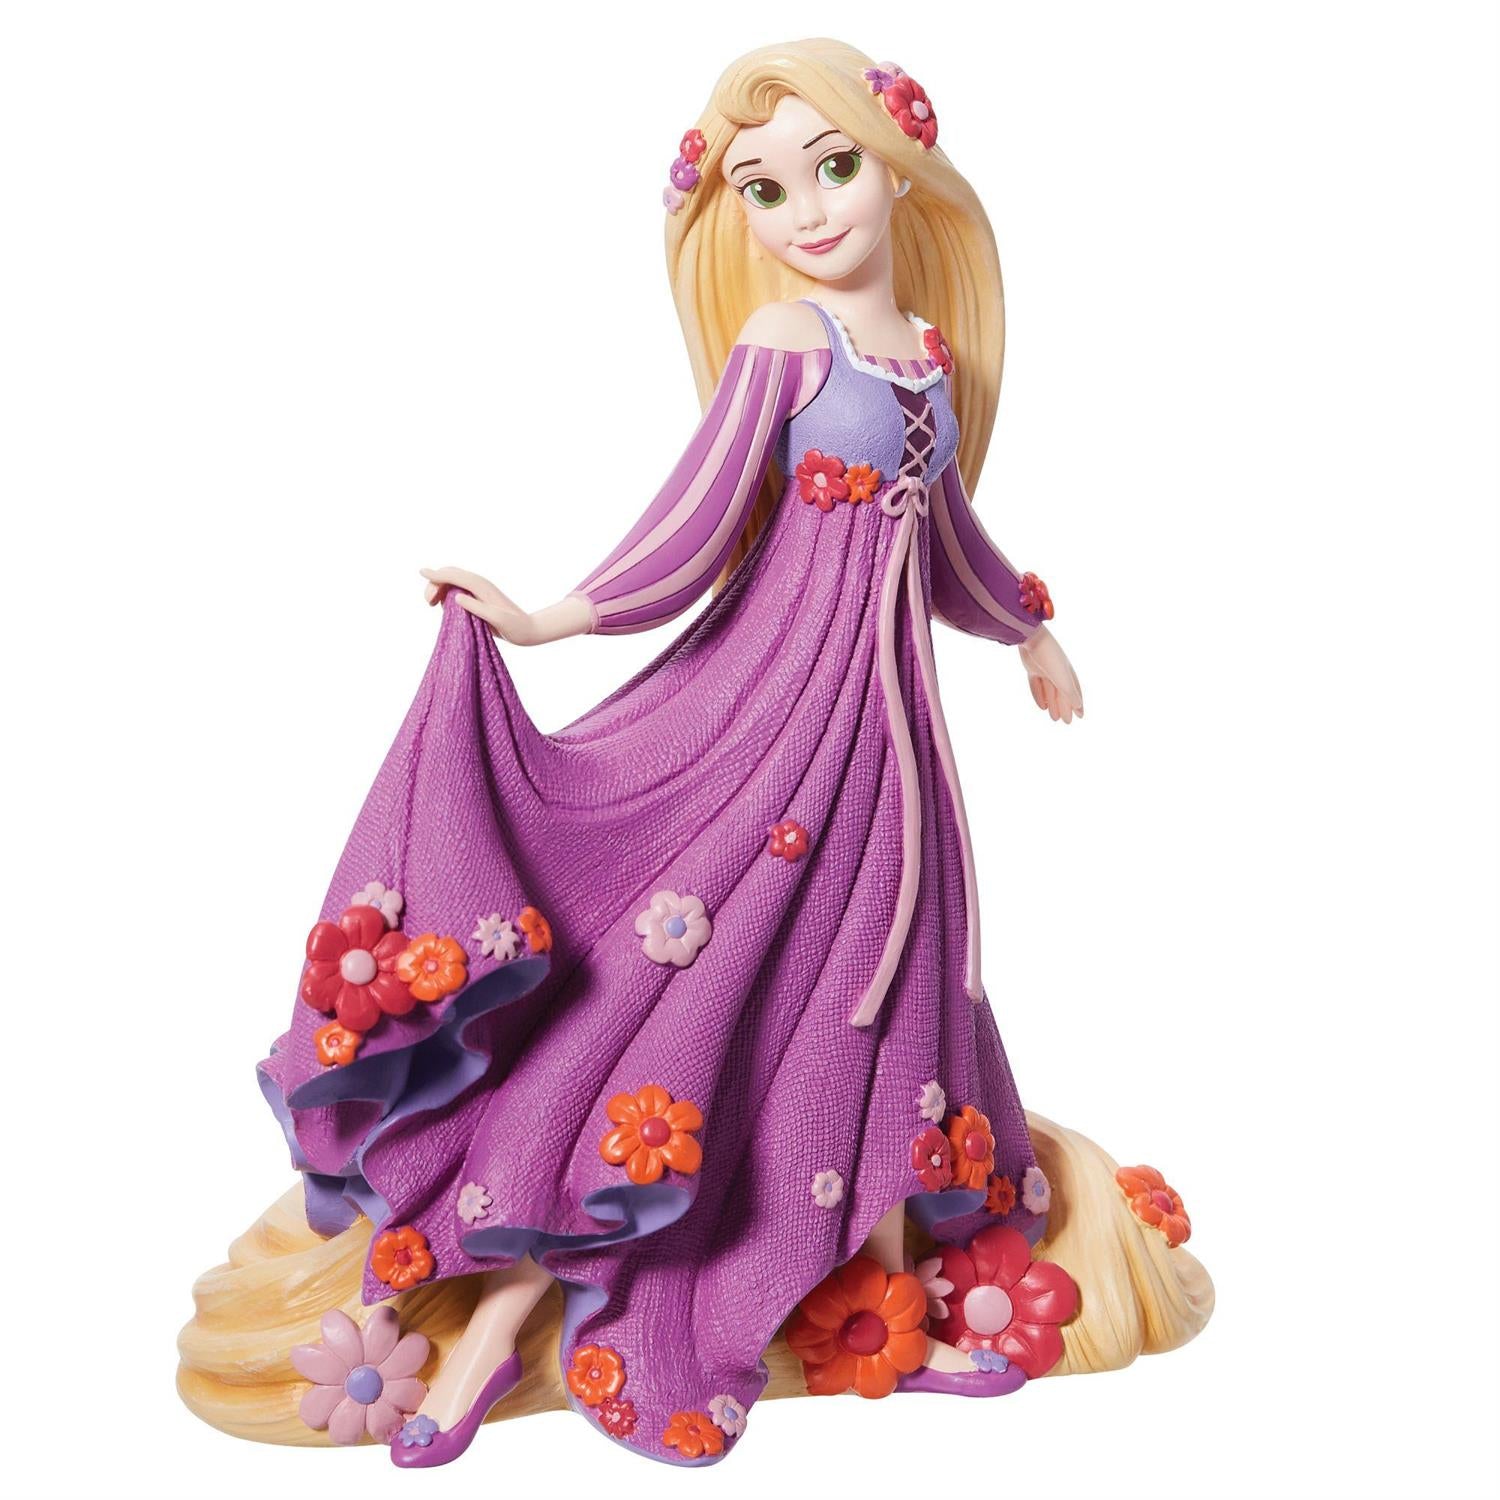 Rapunzel wear her pinkish dress surrounded by dimensional sculpted florals